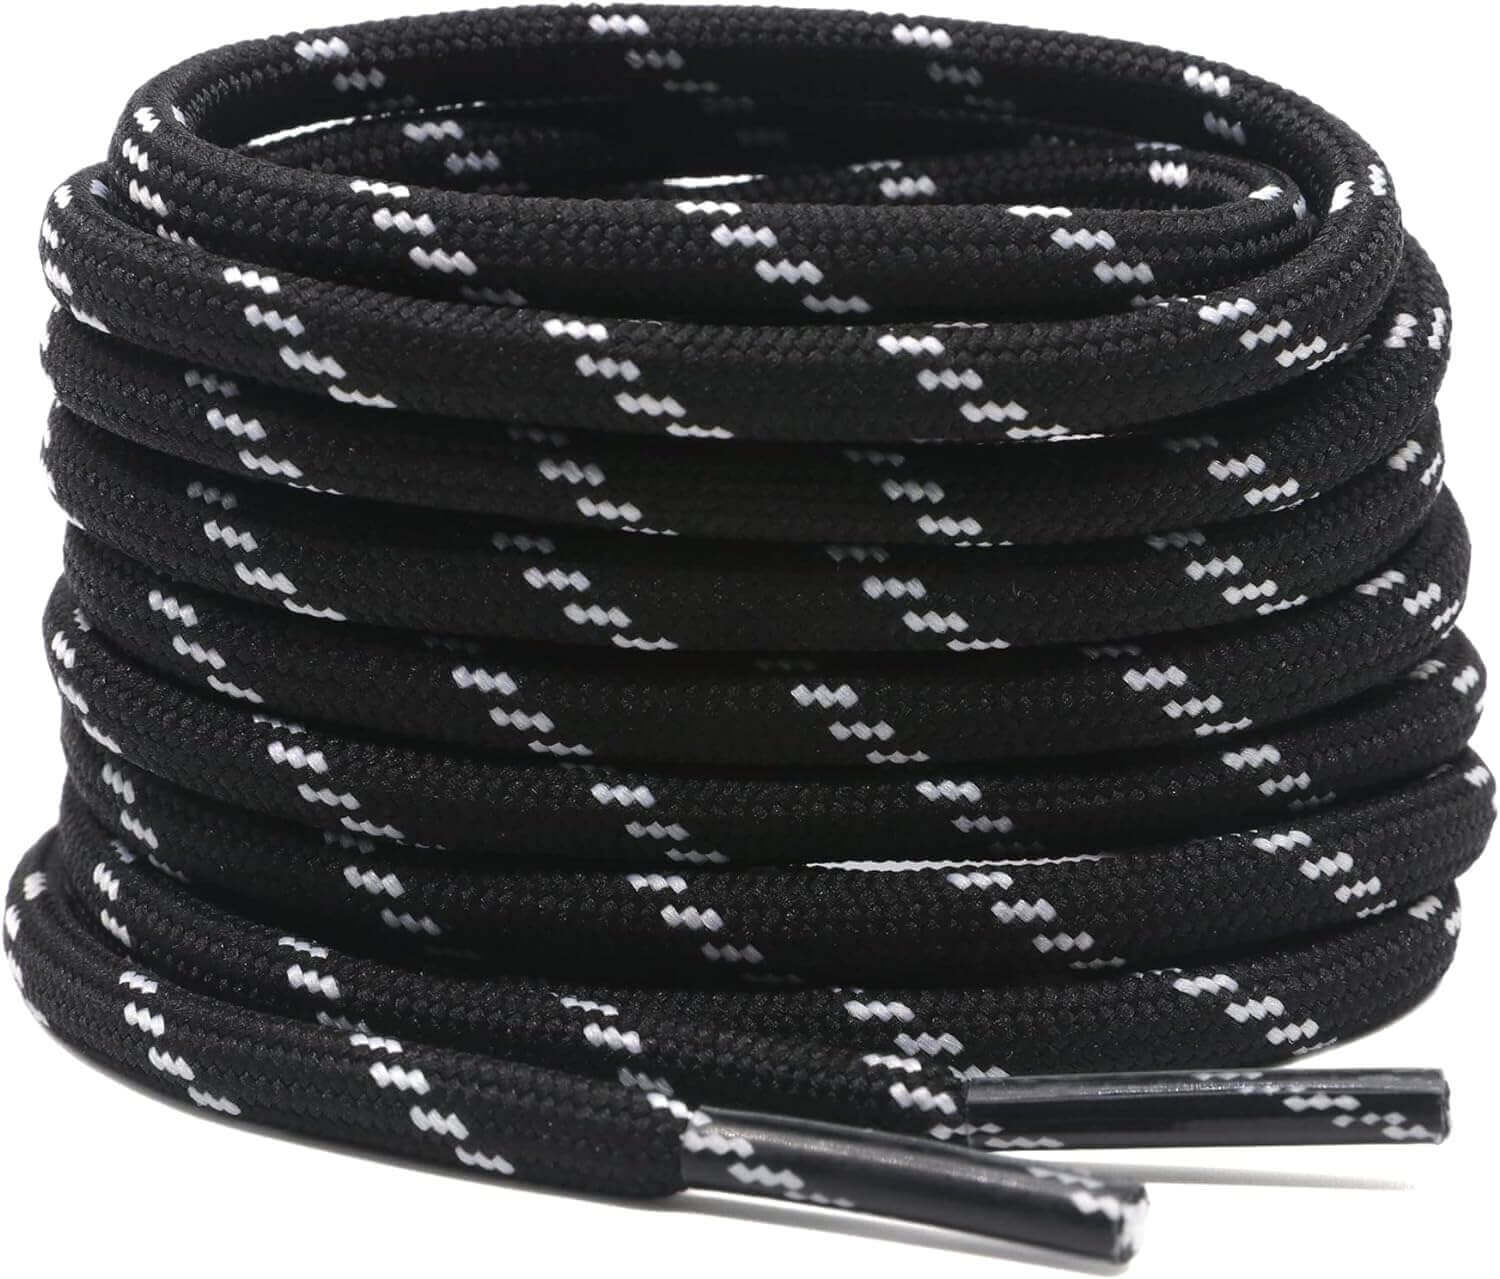 Shop The Latest >2 Pair Work Boot Laces - Hiking, Walking, Shoelaces > *Only $12.95*> From The Top Brand > *DELELEl* > Shop Now and Get Free Shipping On Orders Over $45.00 >*Shop Earth Foot*